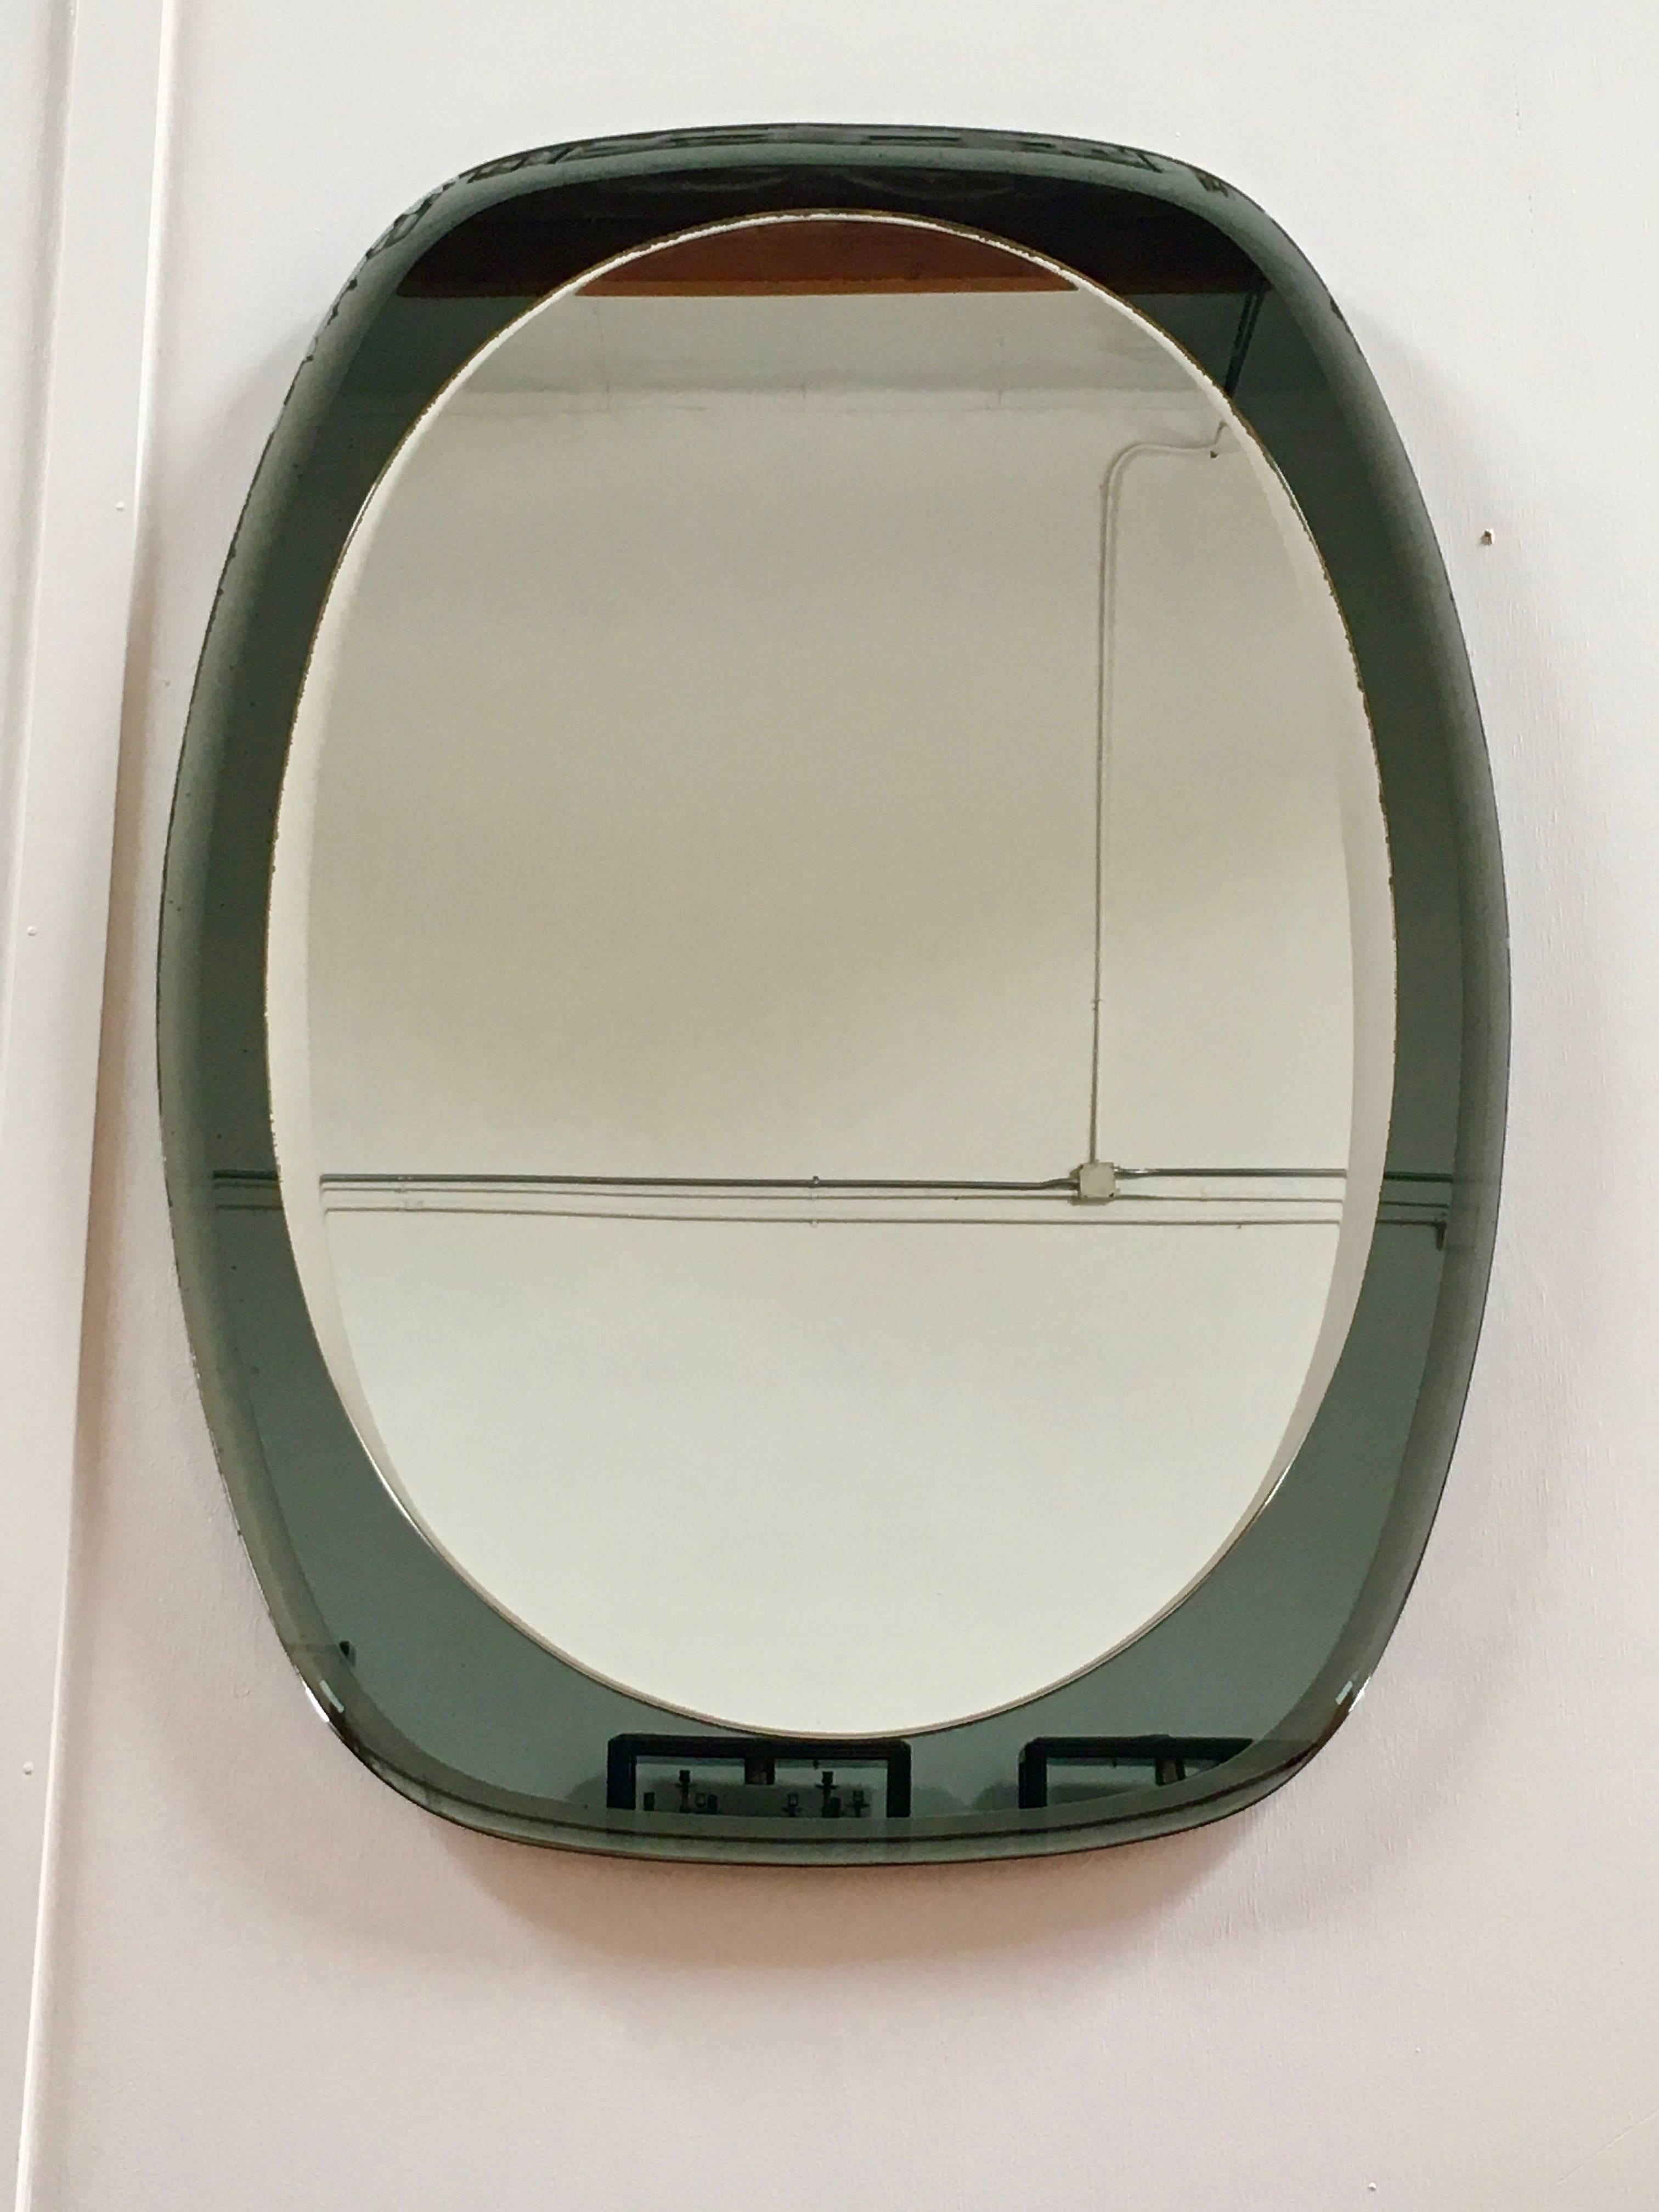 Oval smoked bevelled mirror topped with a bright bevelled mirror in the Italian style.